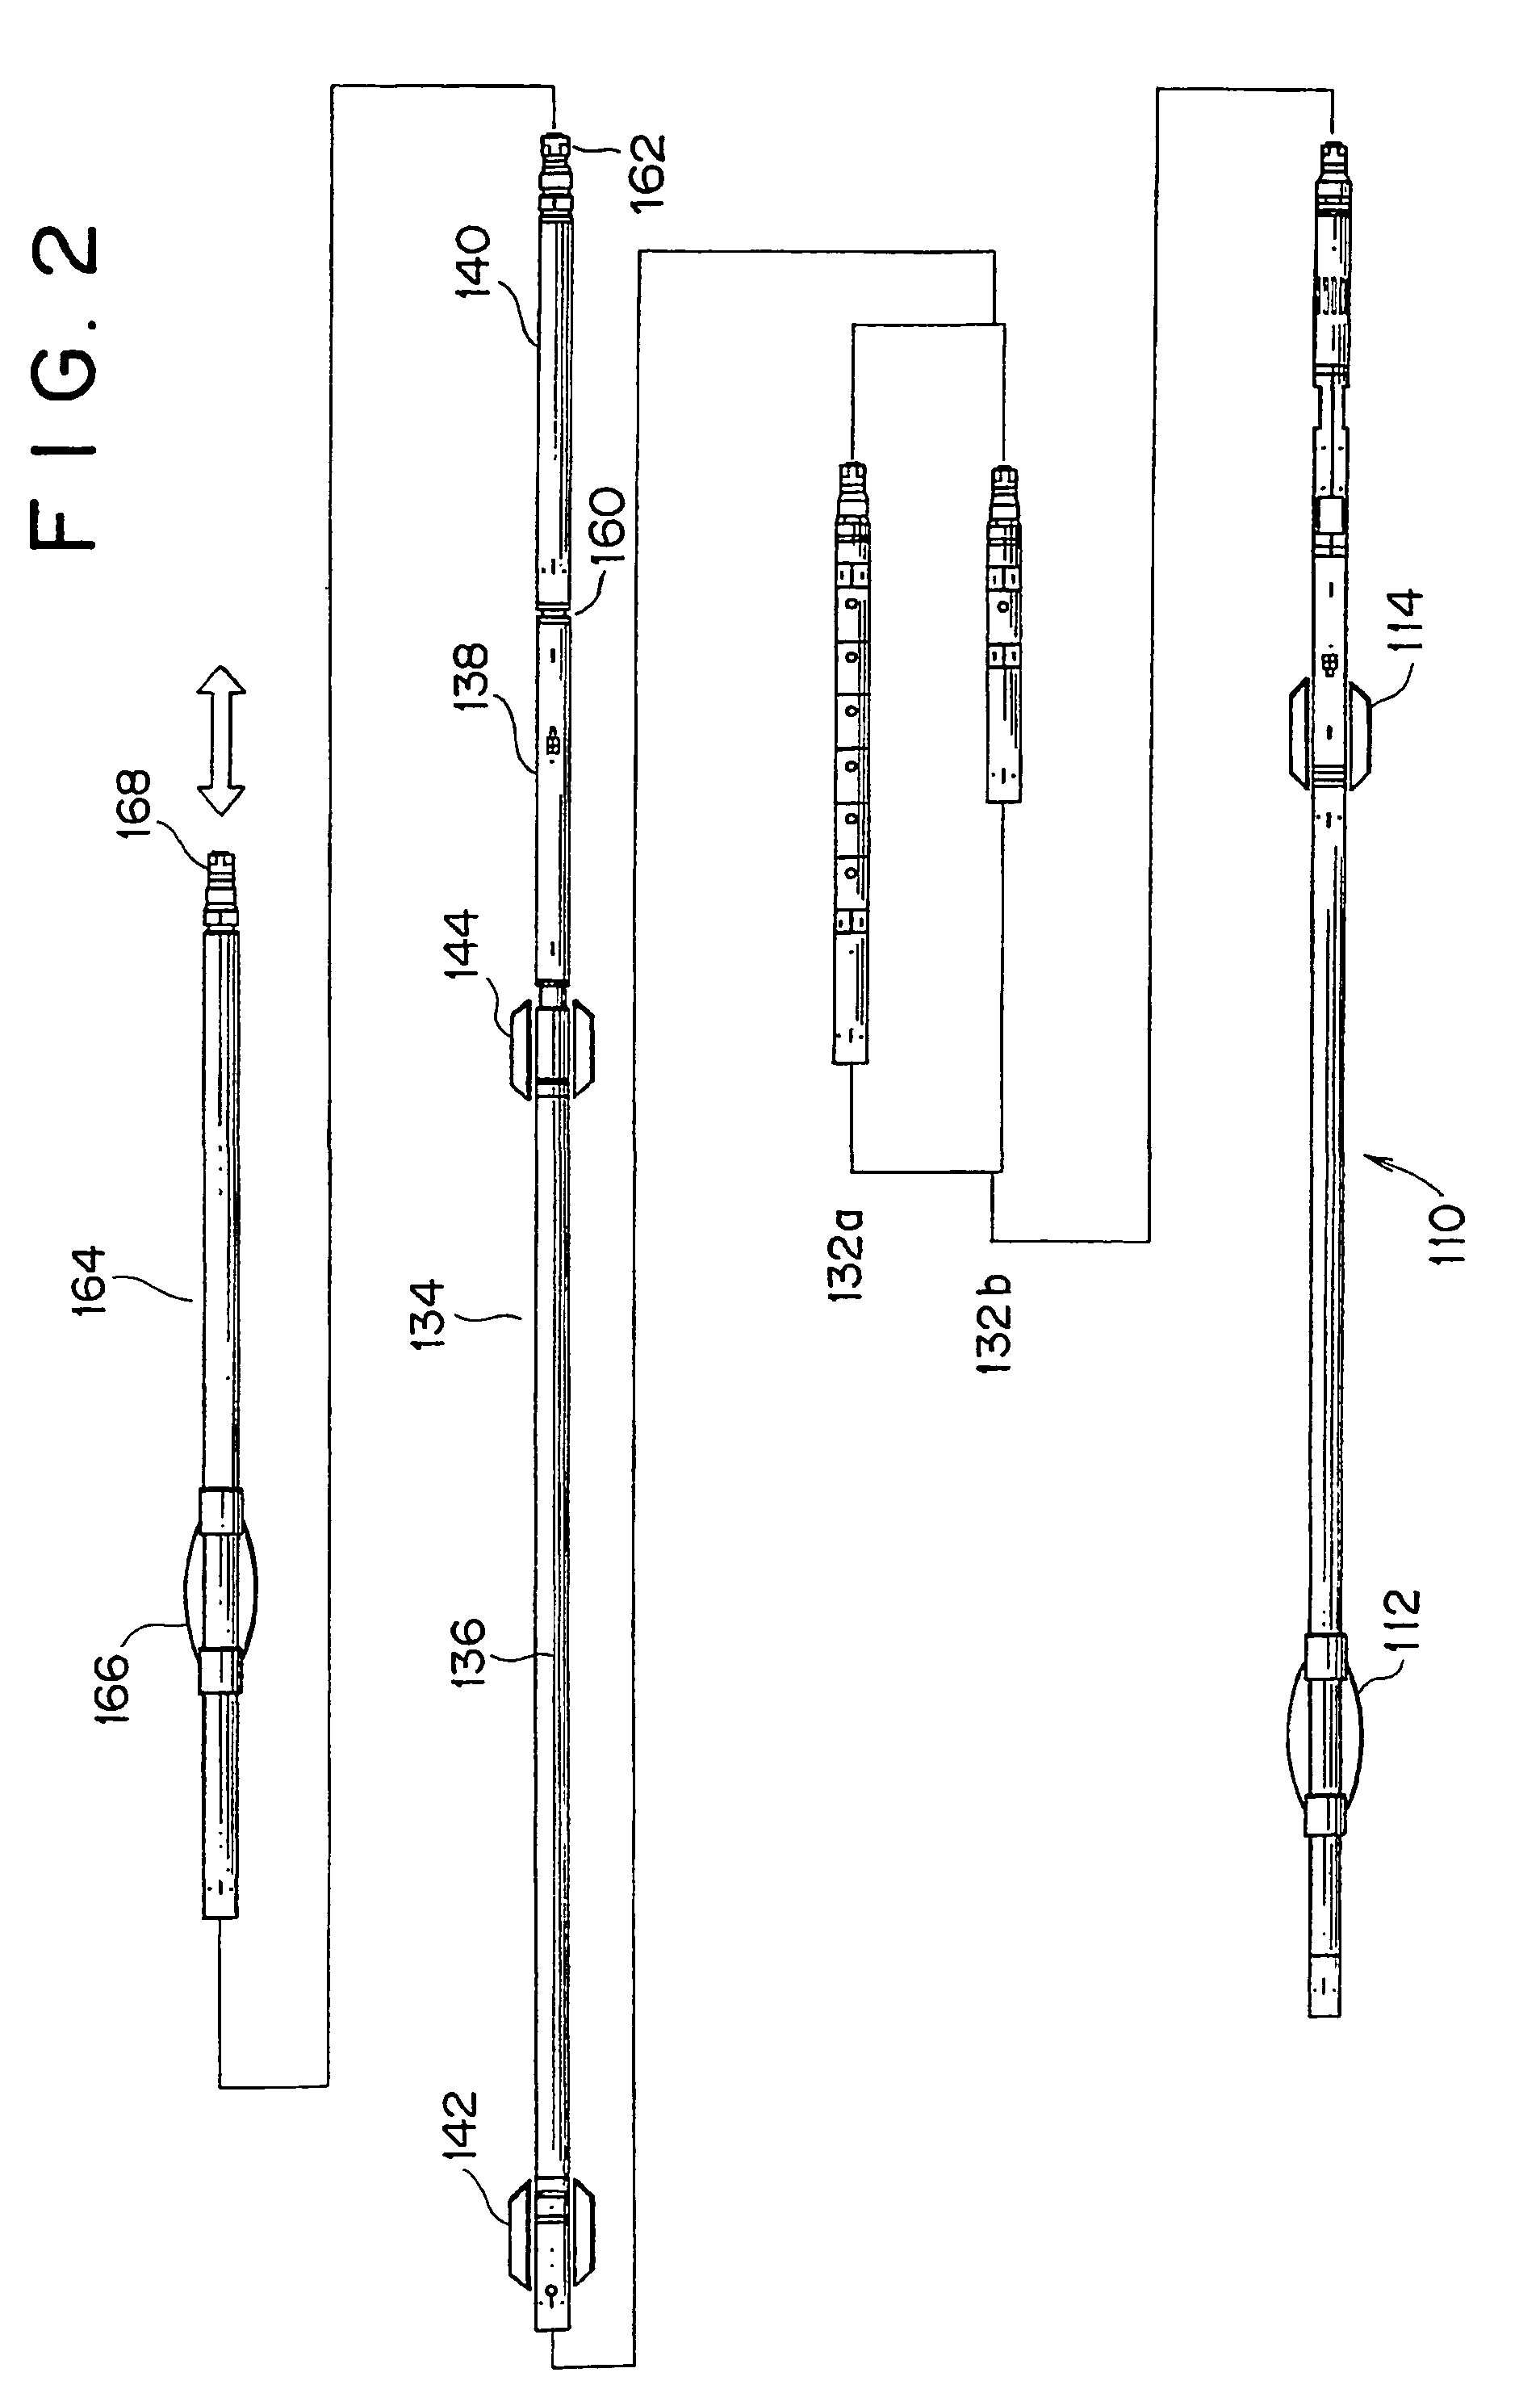 Sonic logging tool including receiver and spacer structure